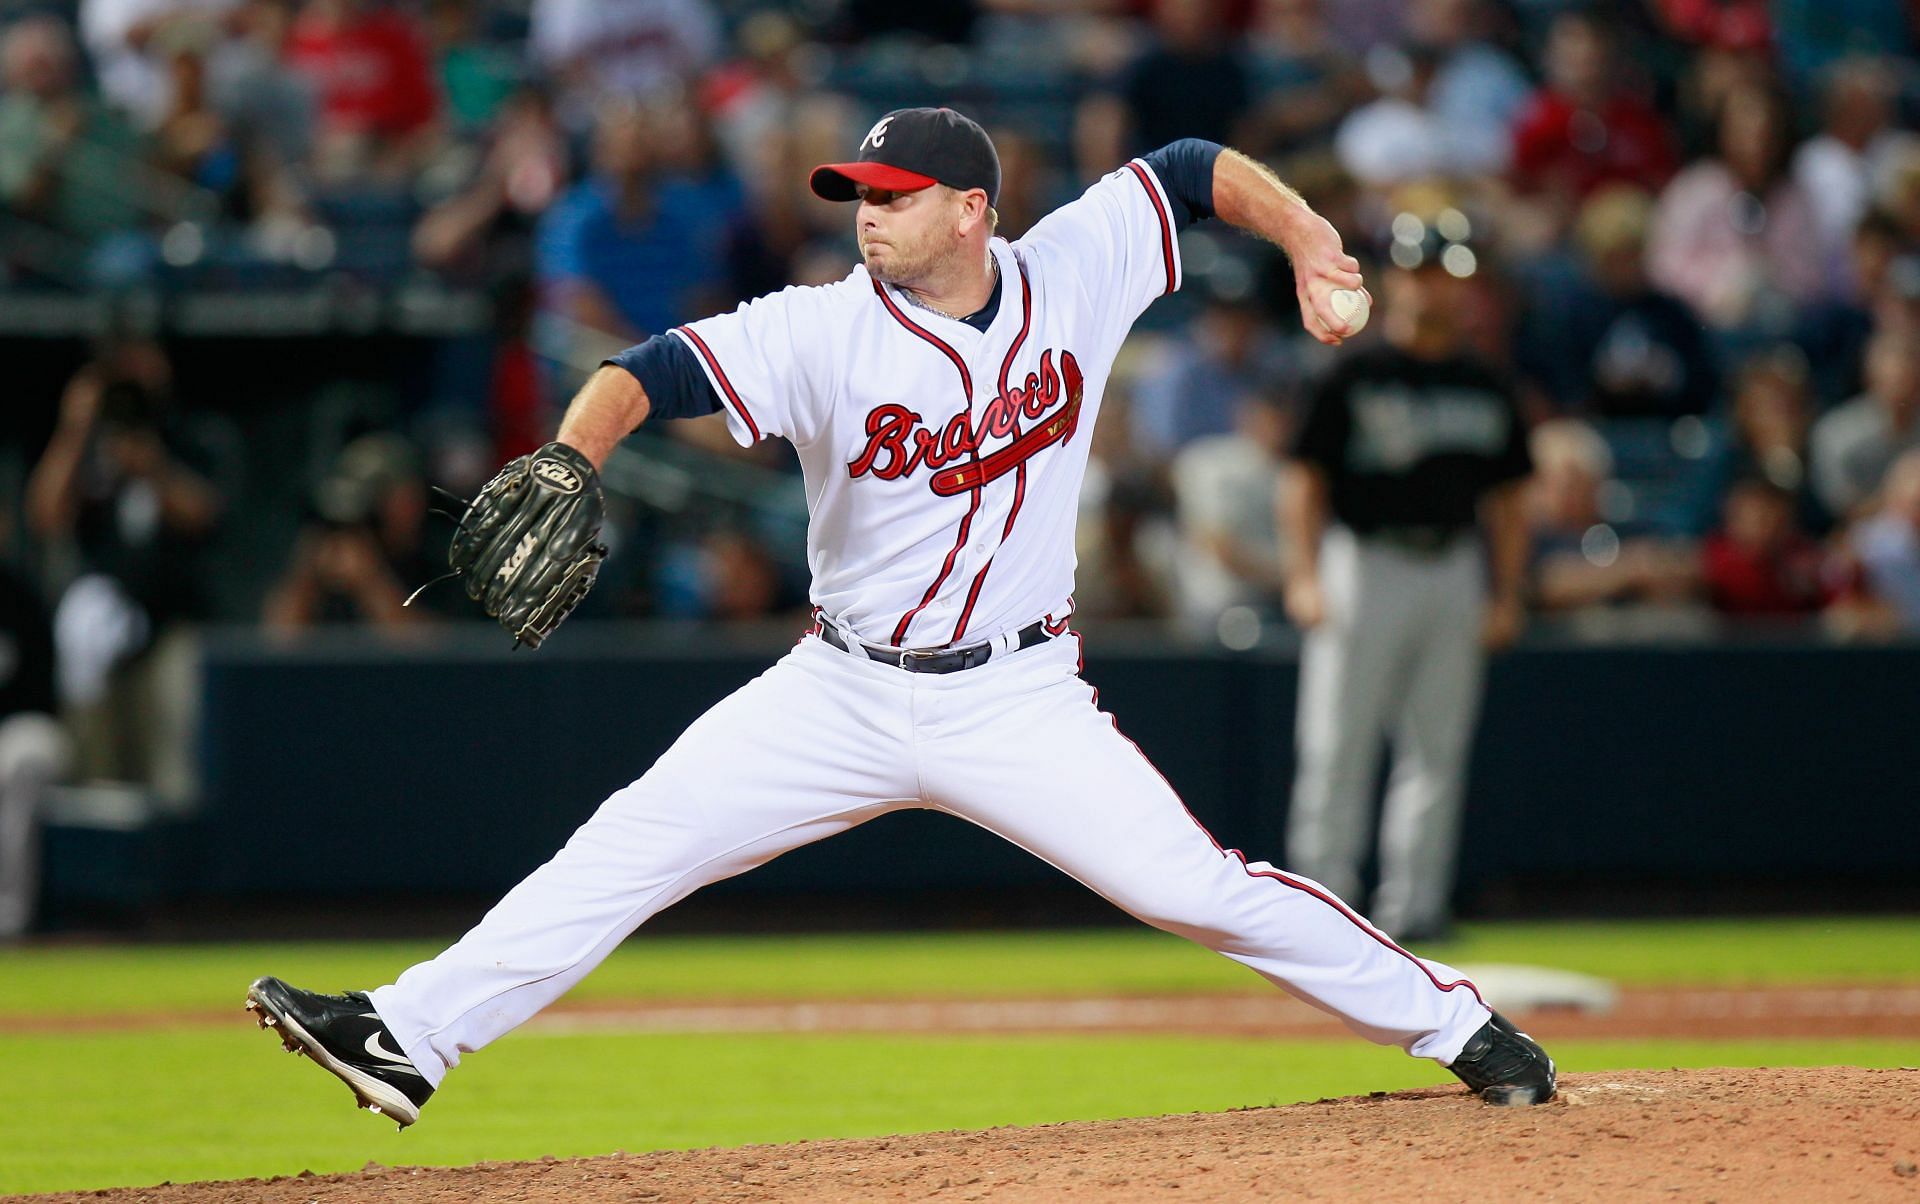 All-Star closer Billy Wagner: I've watched so many Hall of Fame